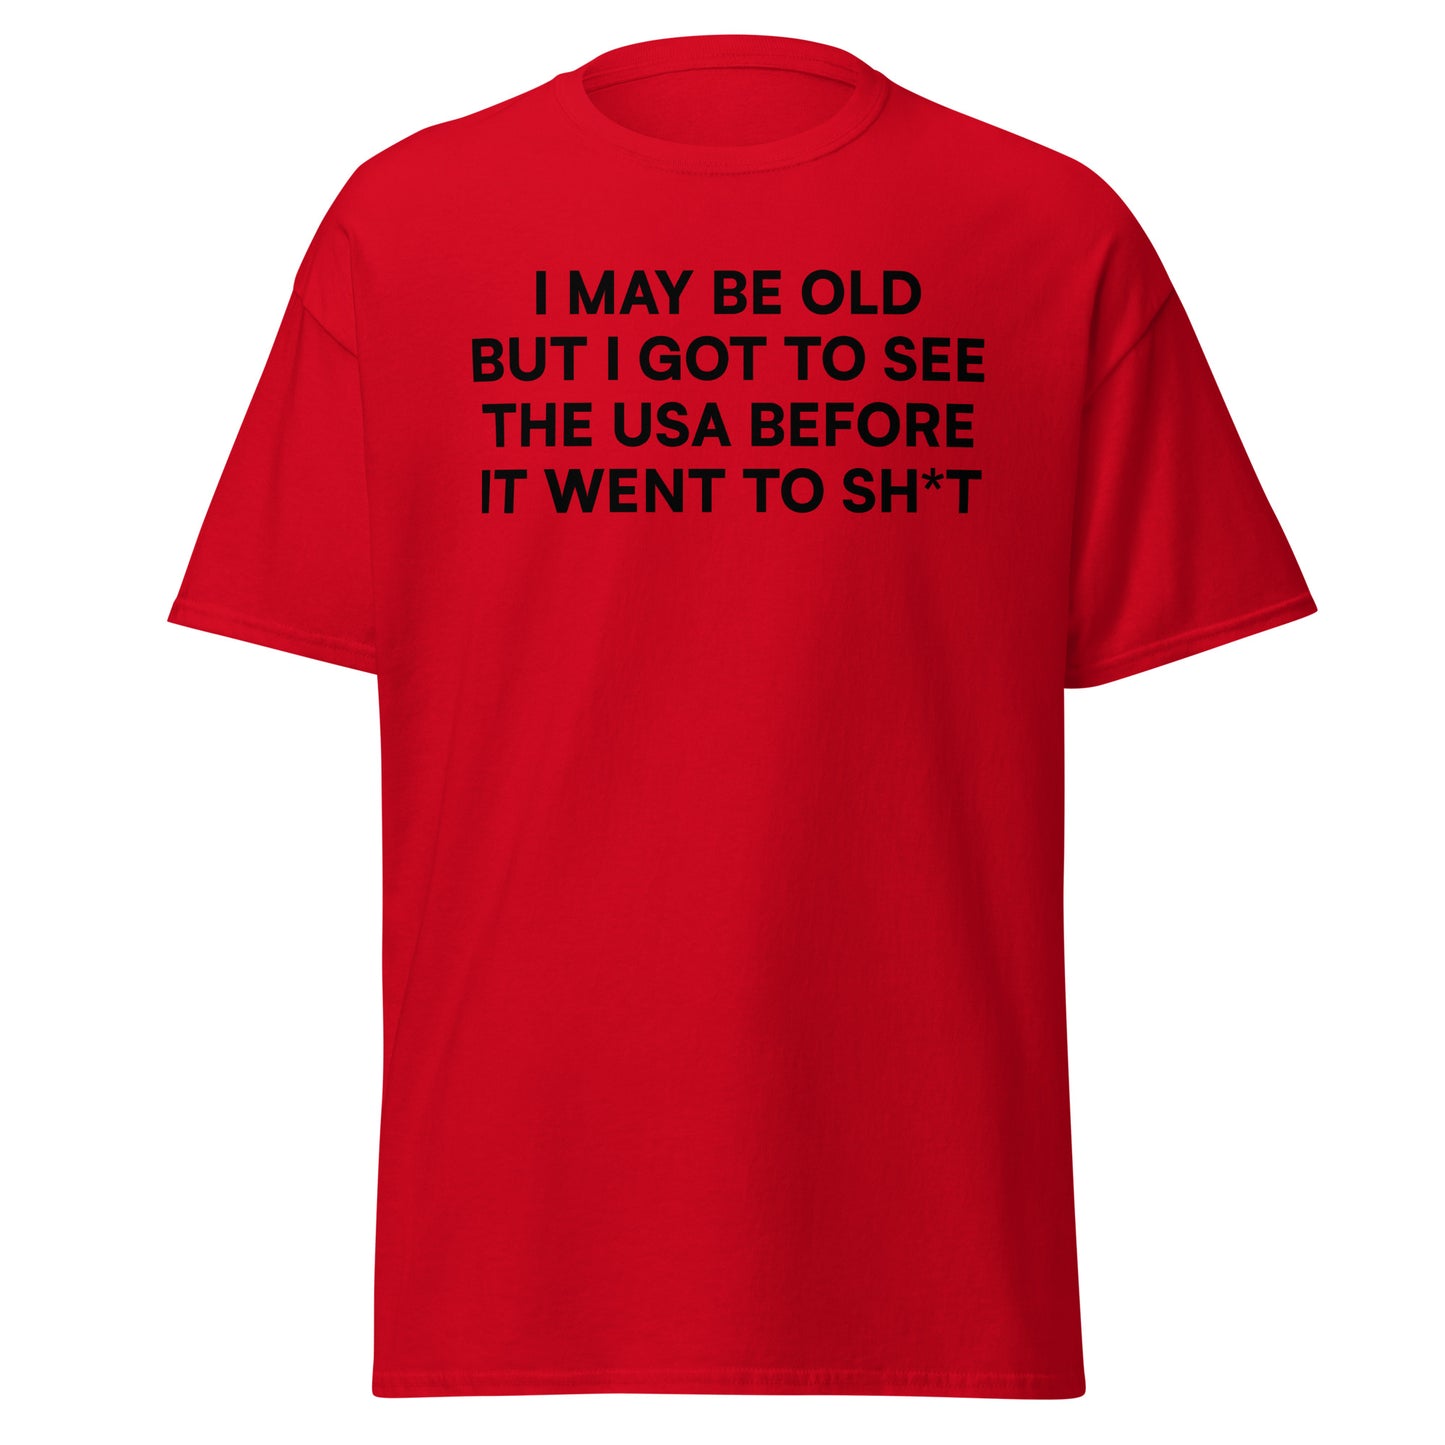 I MAY BE OLD BUT...